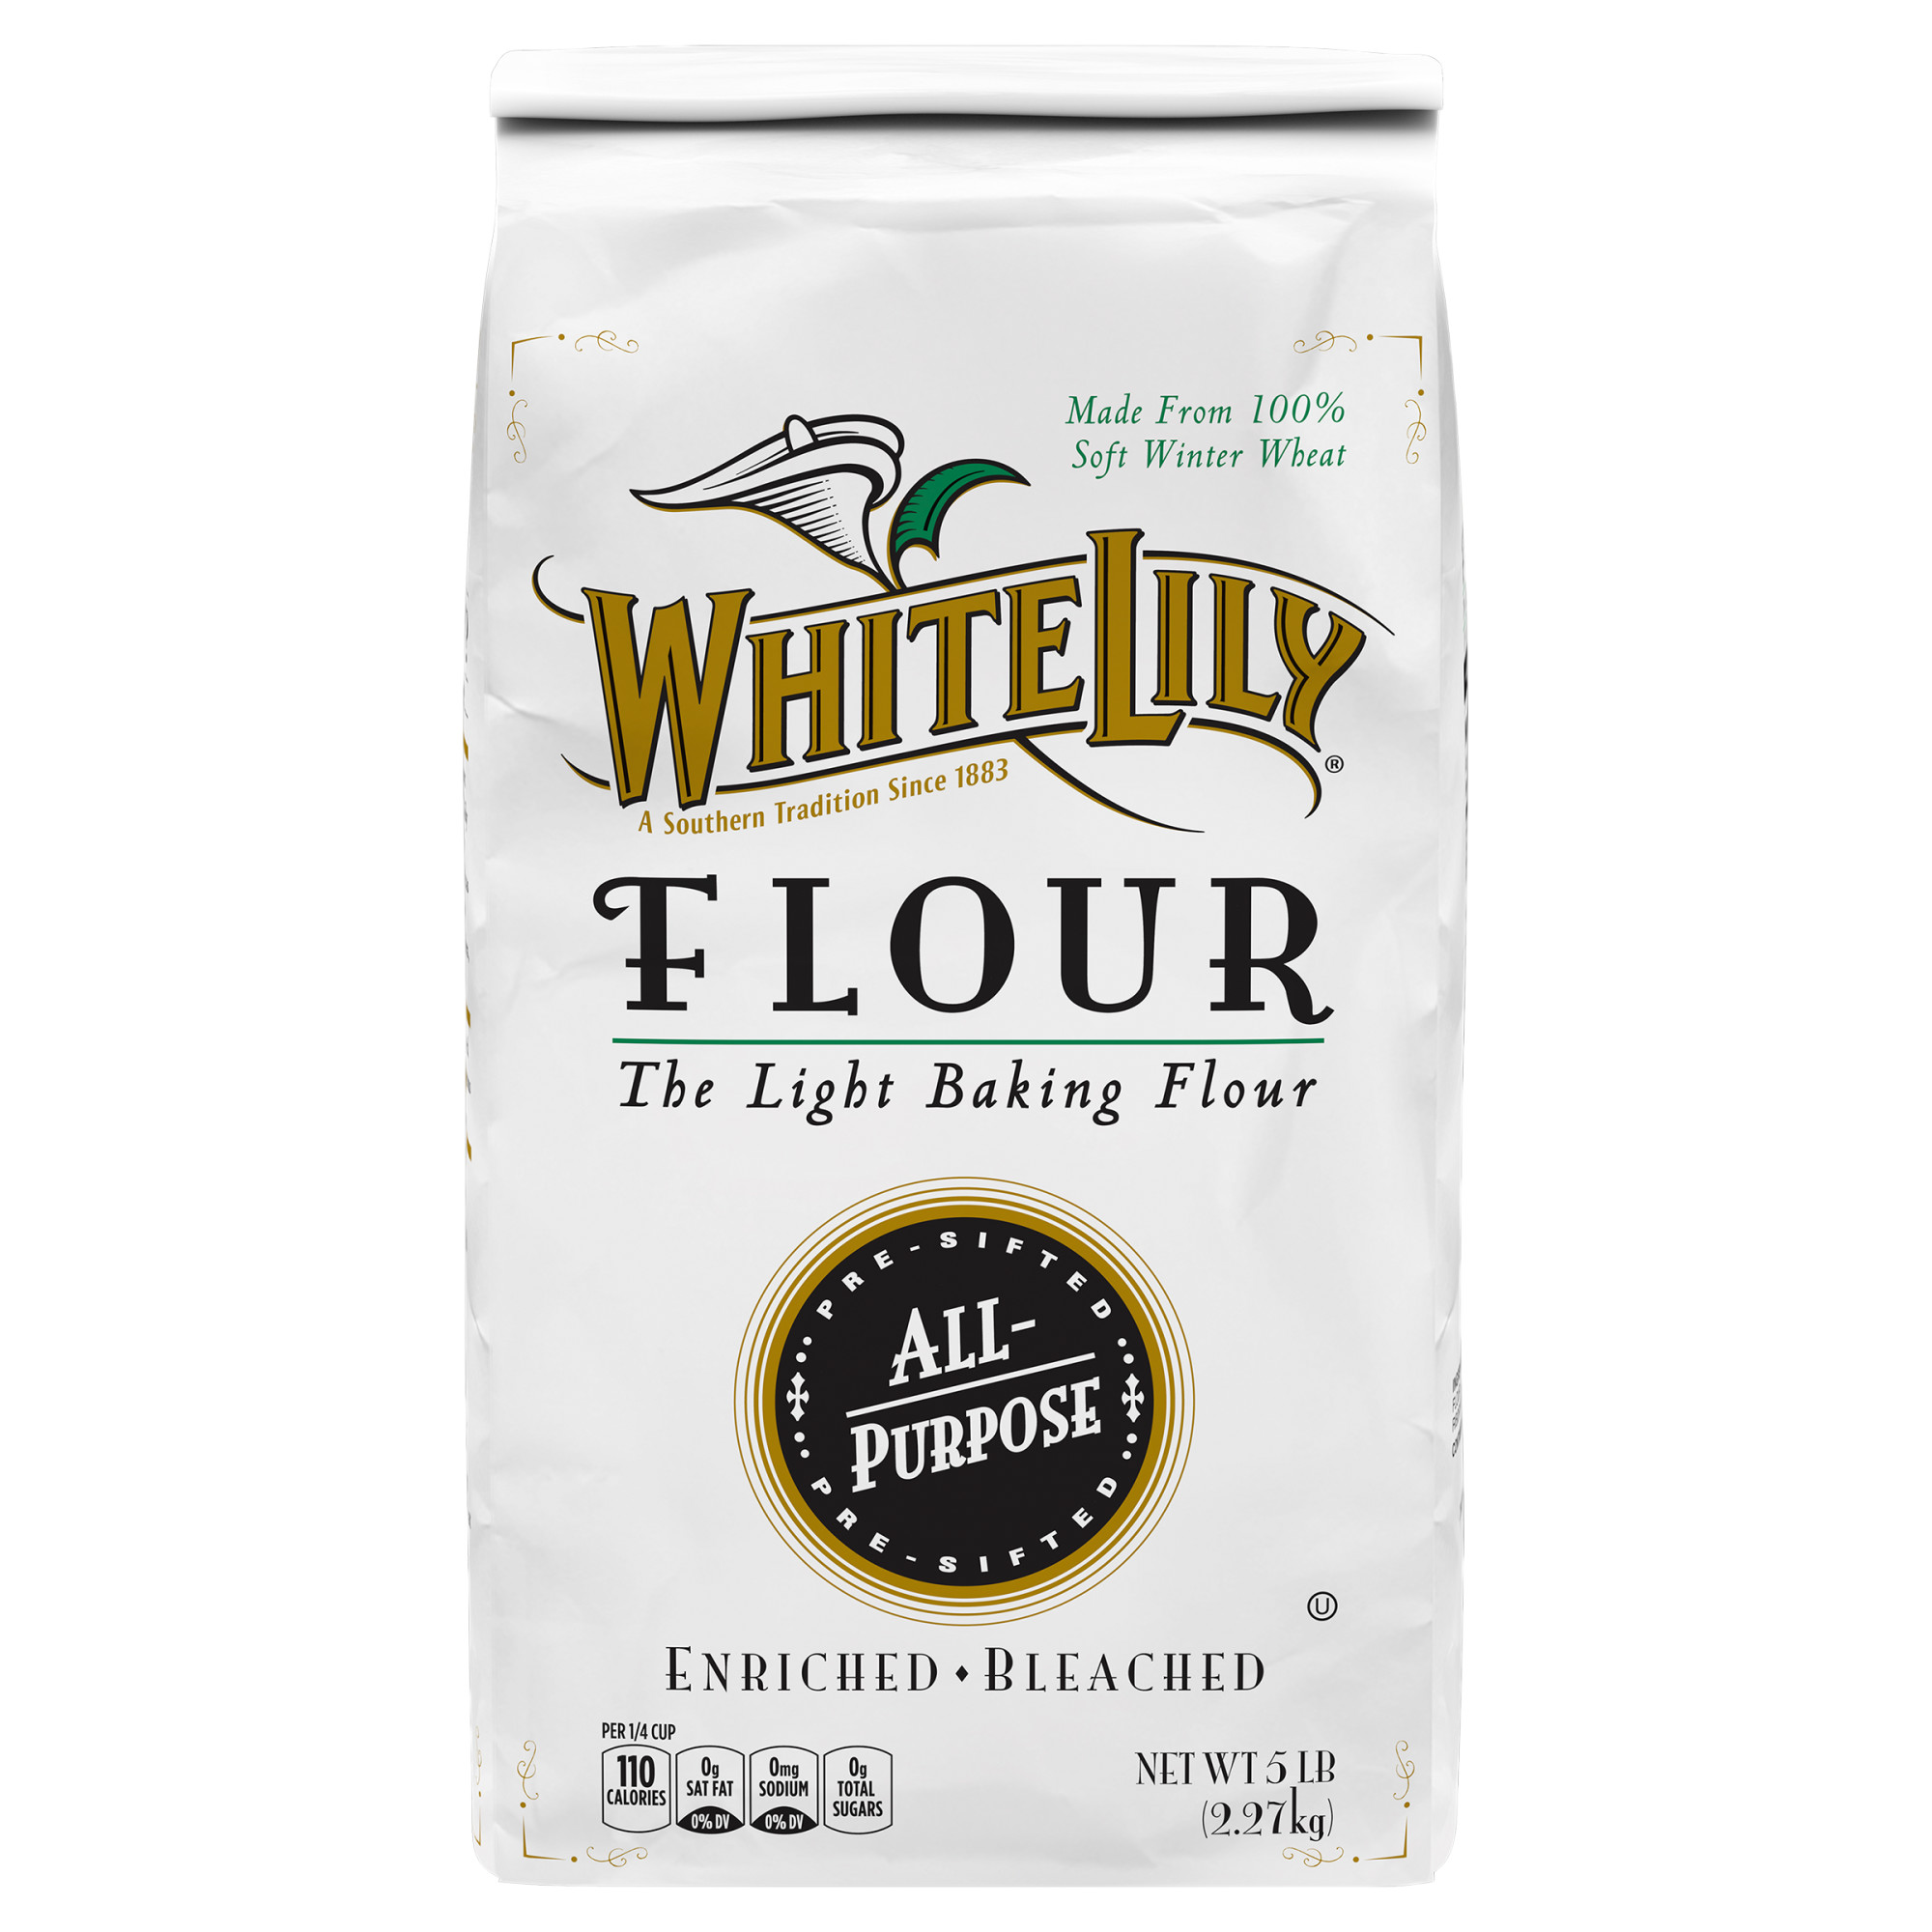 White Lily All Purpose Flour, 5 lb Bag - image 1 of 8